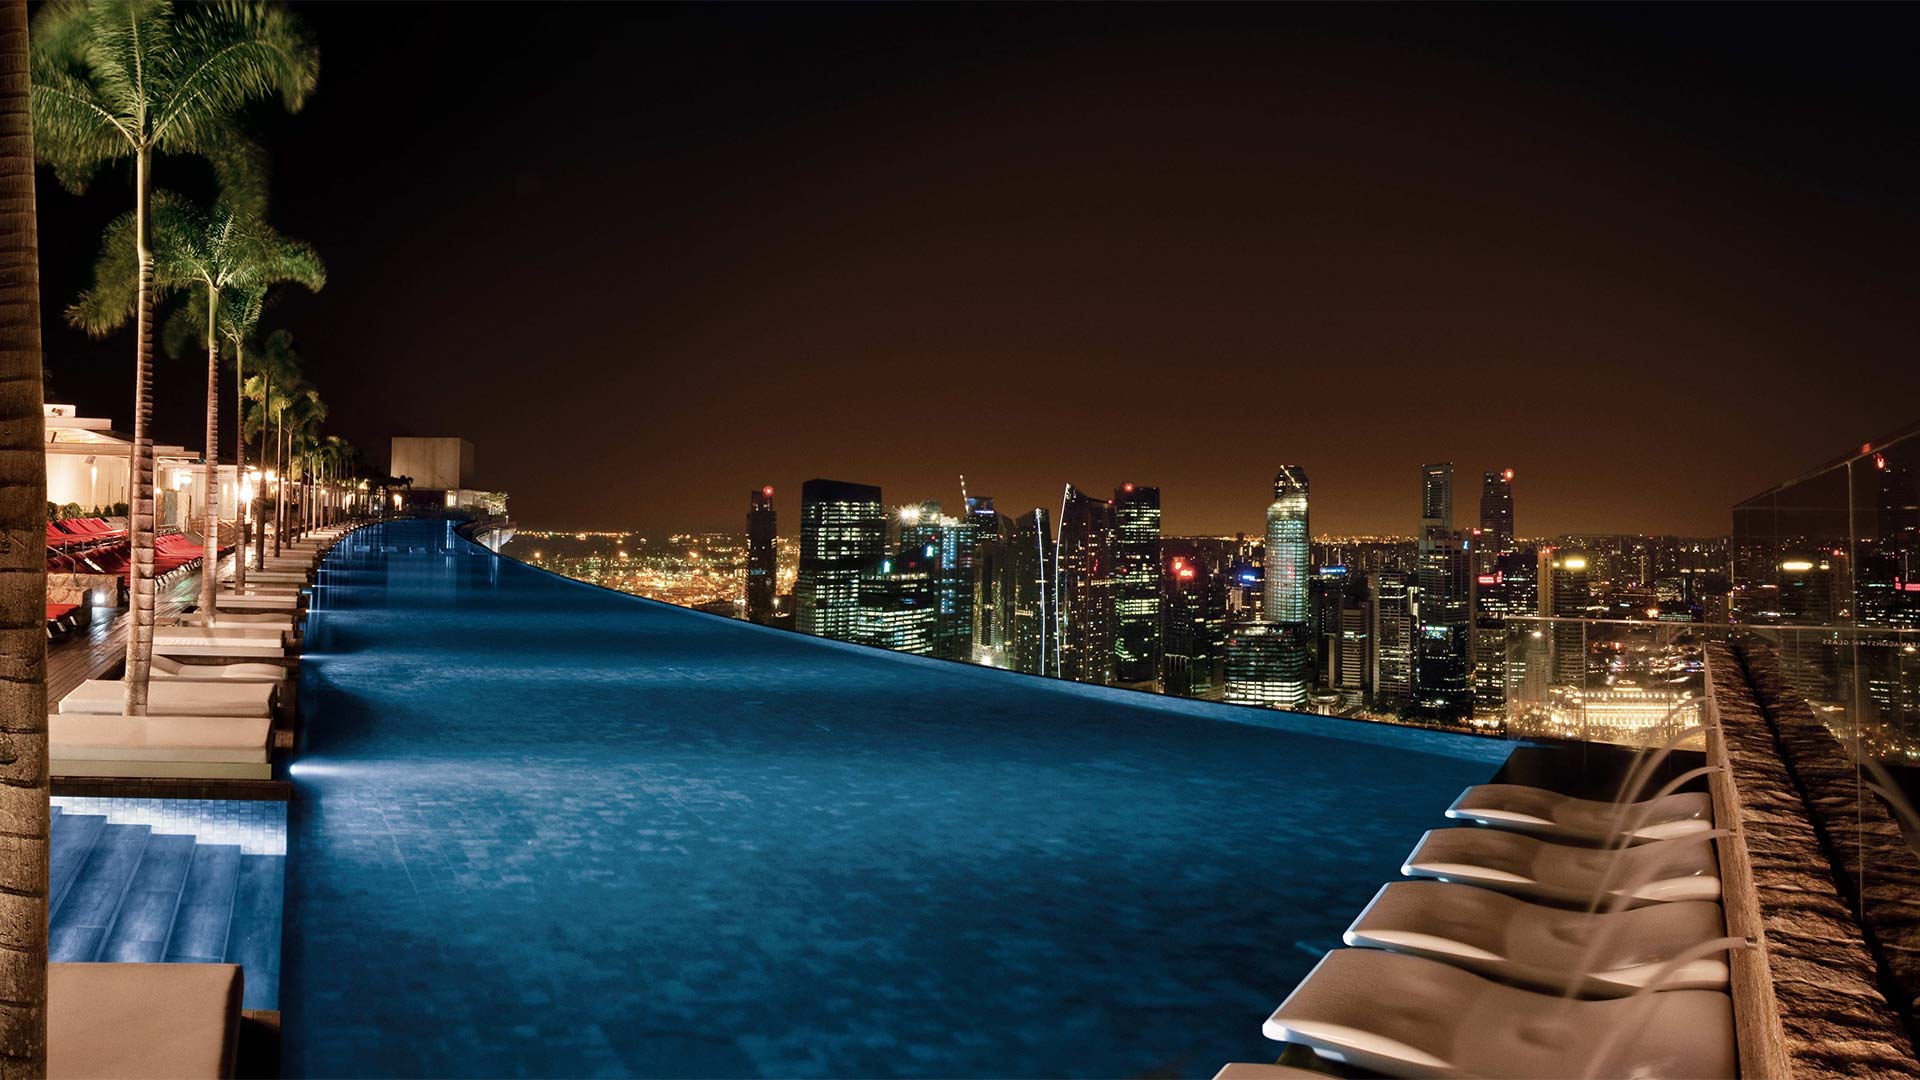 Night view of the longest Infinity Pool in the world, at Marina Bay Sands